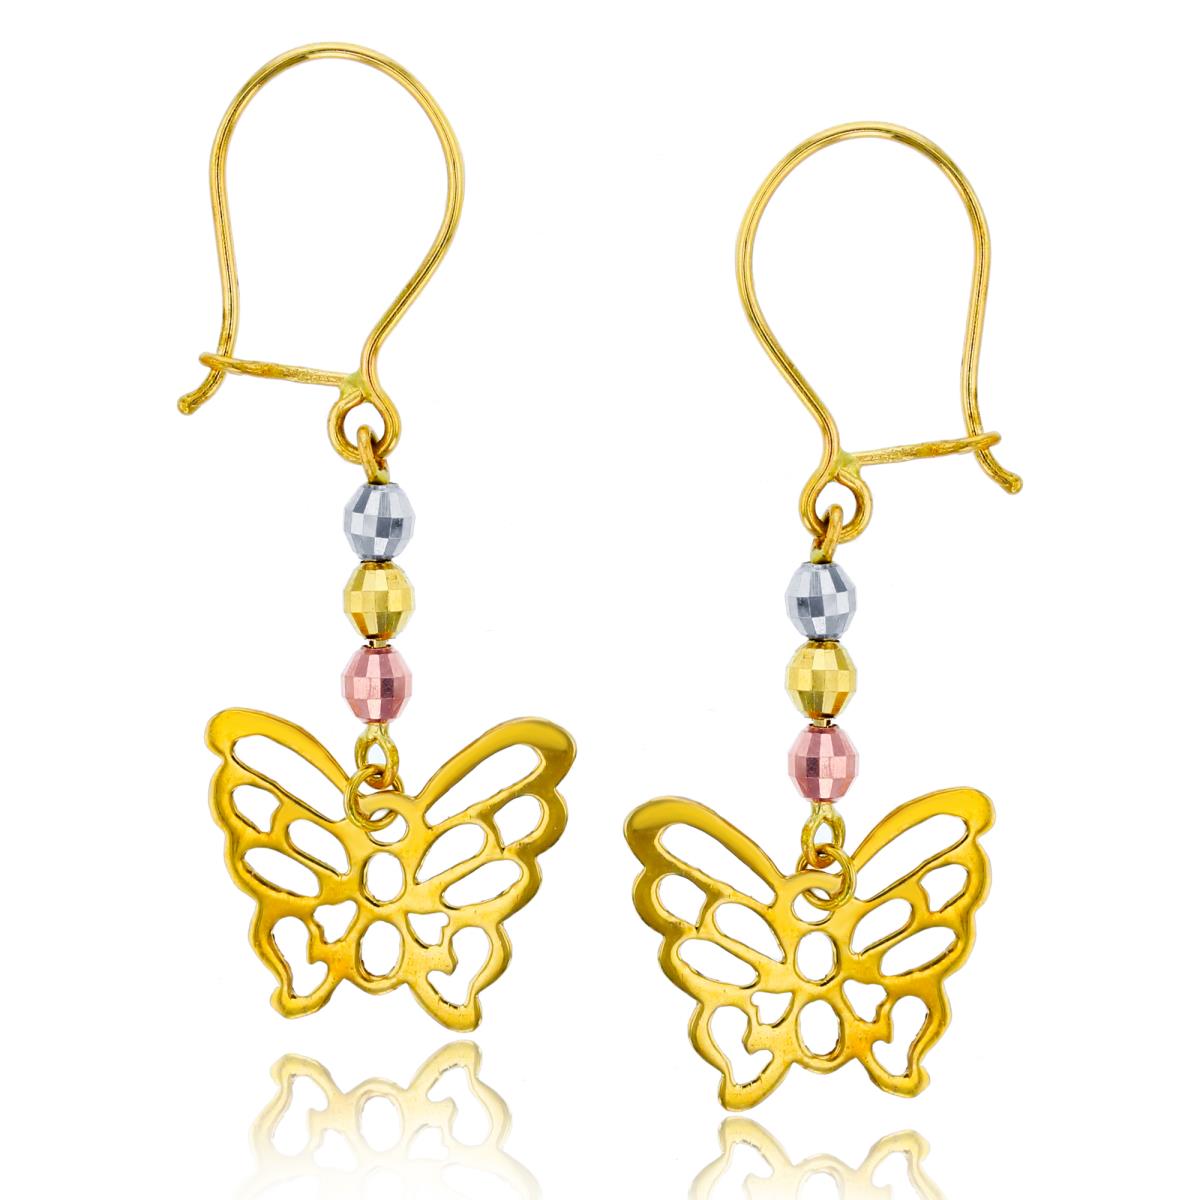 10K Tri-color Gold Diamond Cut Bead and Butterfly Dangling Earring